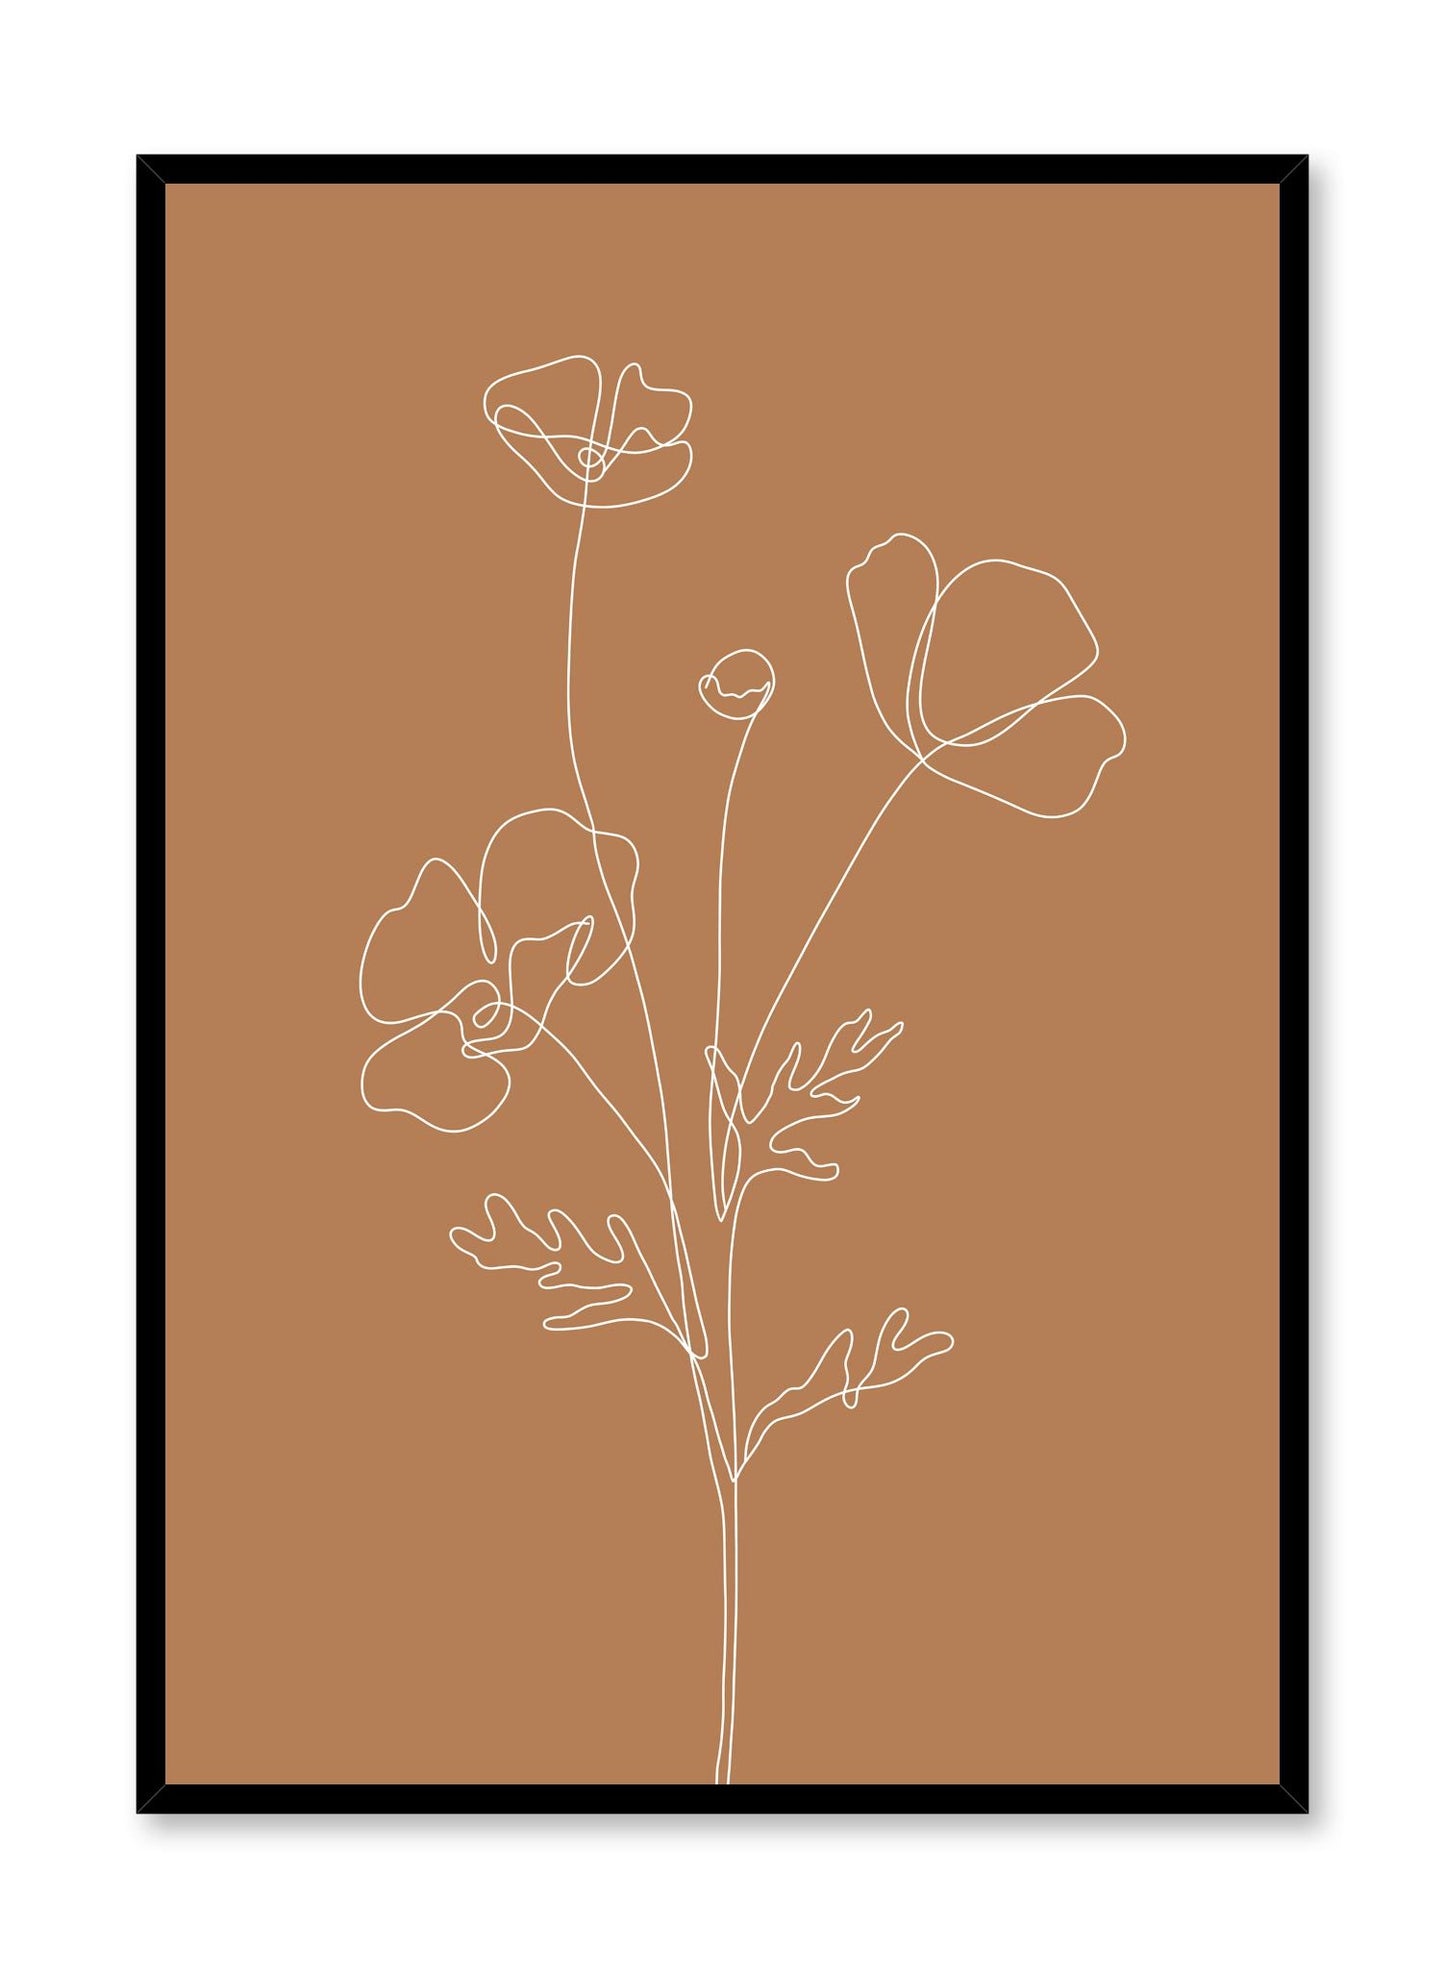 Minimalist design poster by Opposite Wall with line art drawing of poppy with burnt orange background